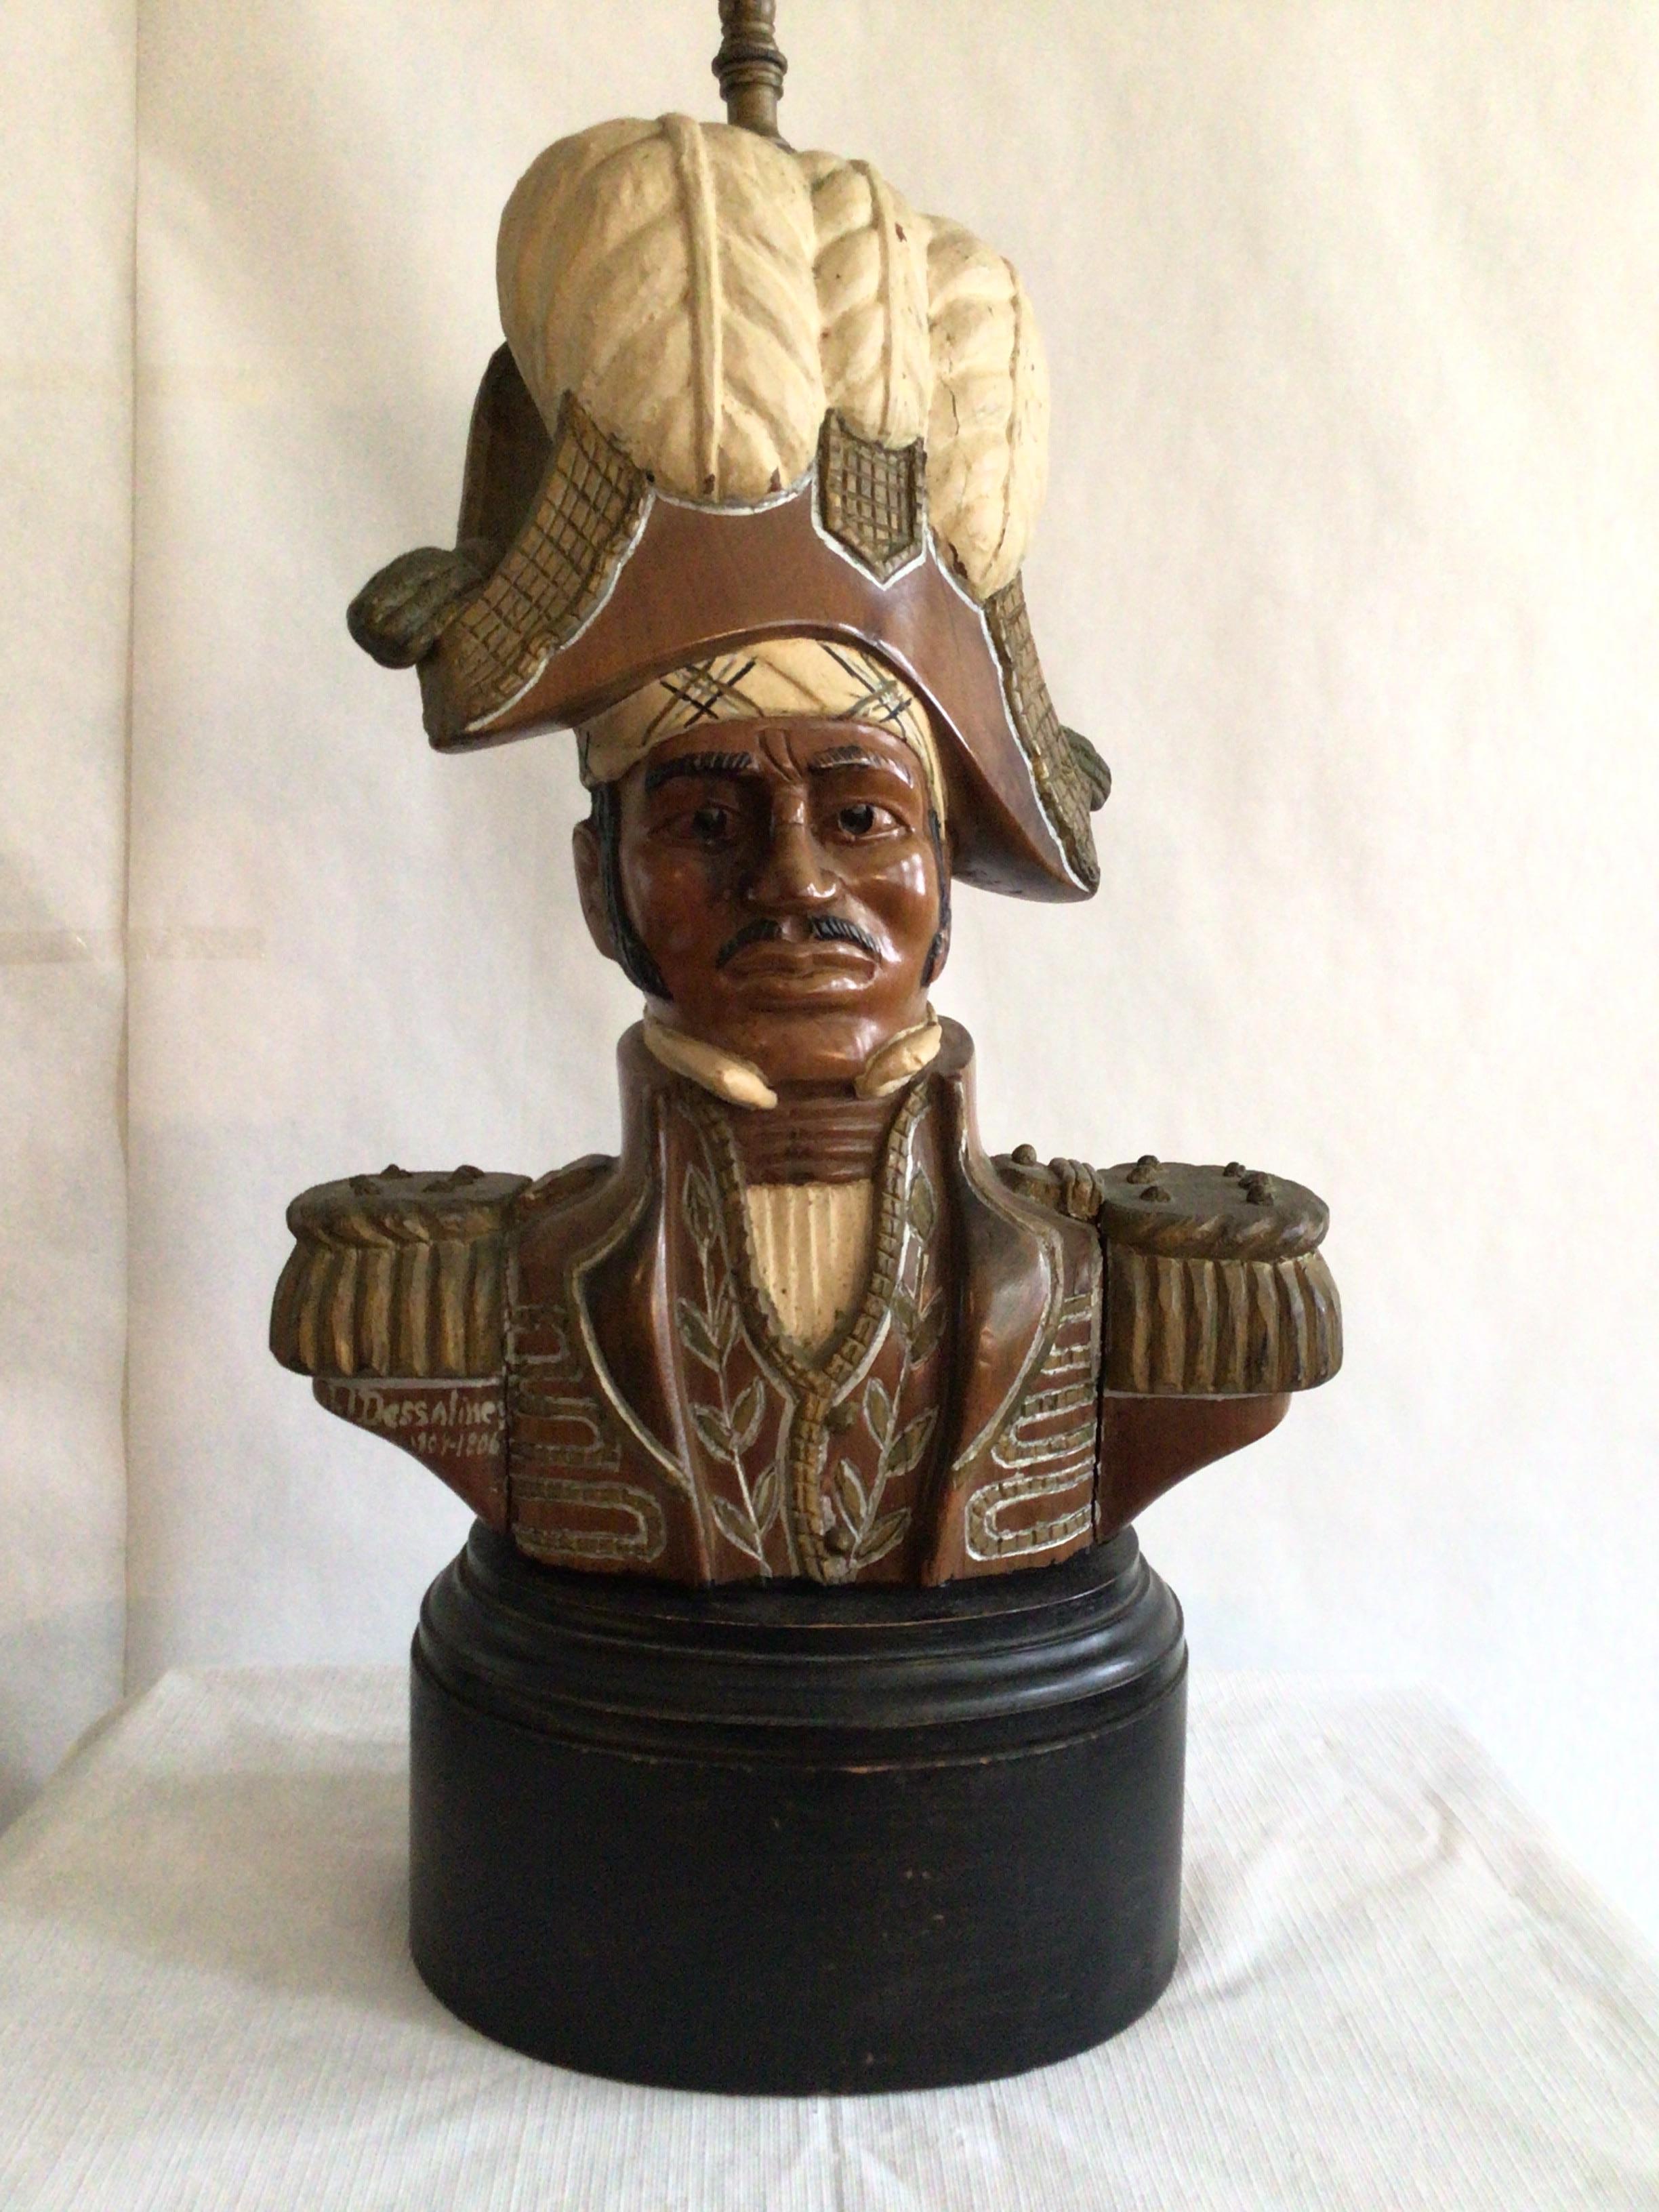 1940s hand carved and painted admiral table lamp
Signed JJDessaline 1804-1806 
Back* Ulysse Dabouze (sculpture name) Jérémie, Haiti 
All wood base 
Height to top of socket.